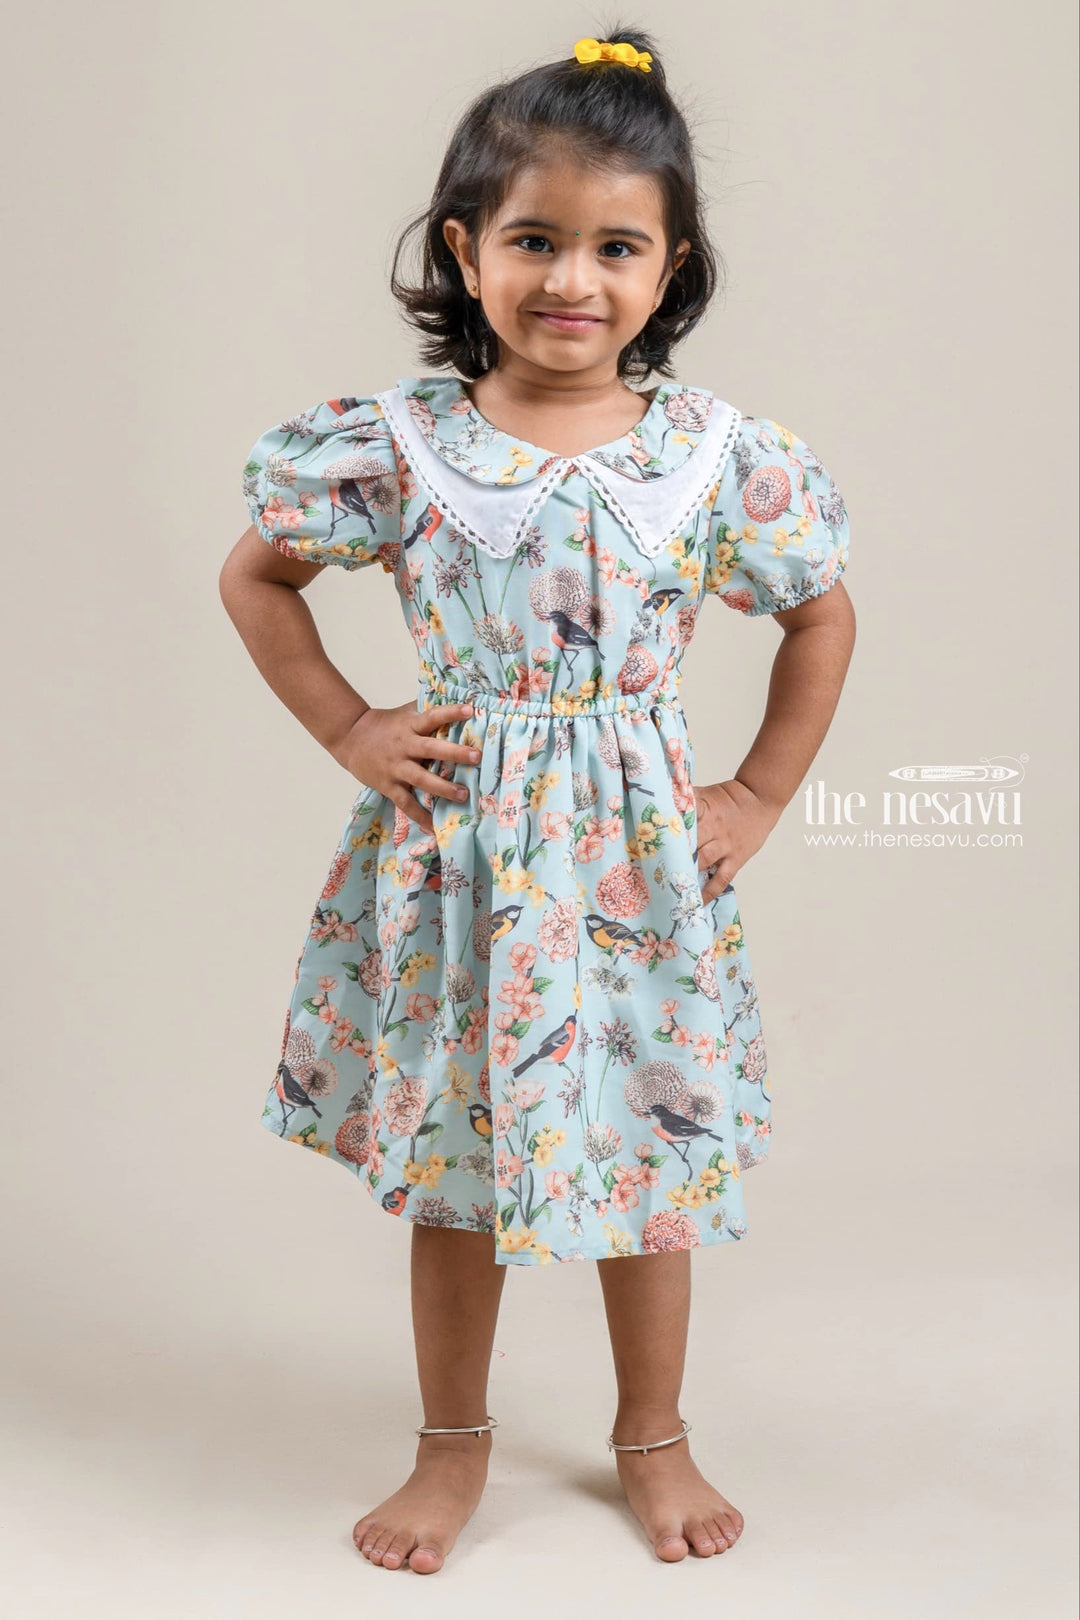 The Nesavu Girls Fancy Frock Charming Floral N Bird Printed Turquoise Casual Cotton Frock For Girls Nesavu 18 (2Y) / Blue / Rayon GFC1039A-18 Floral Printed Cotton frock For Kids | New Cotton Dress For Girls | The Nesavu